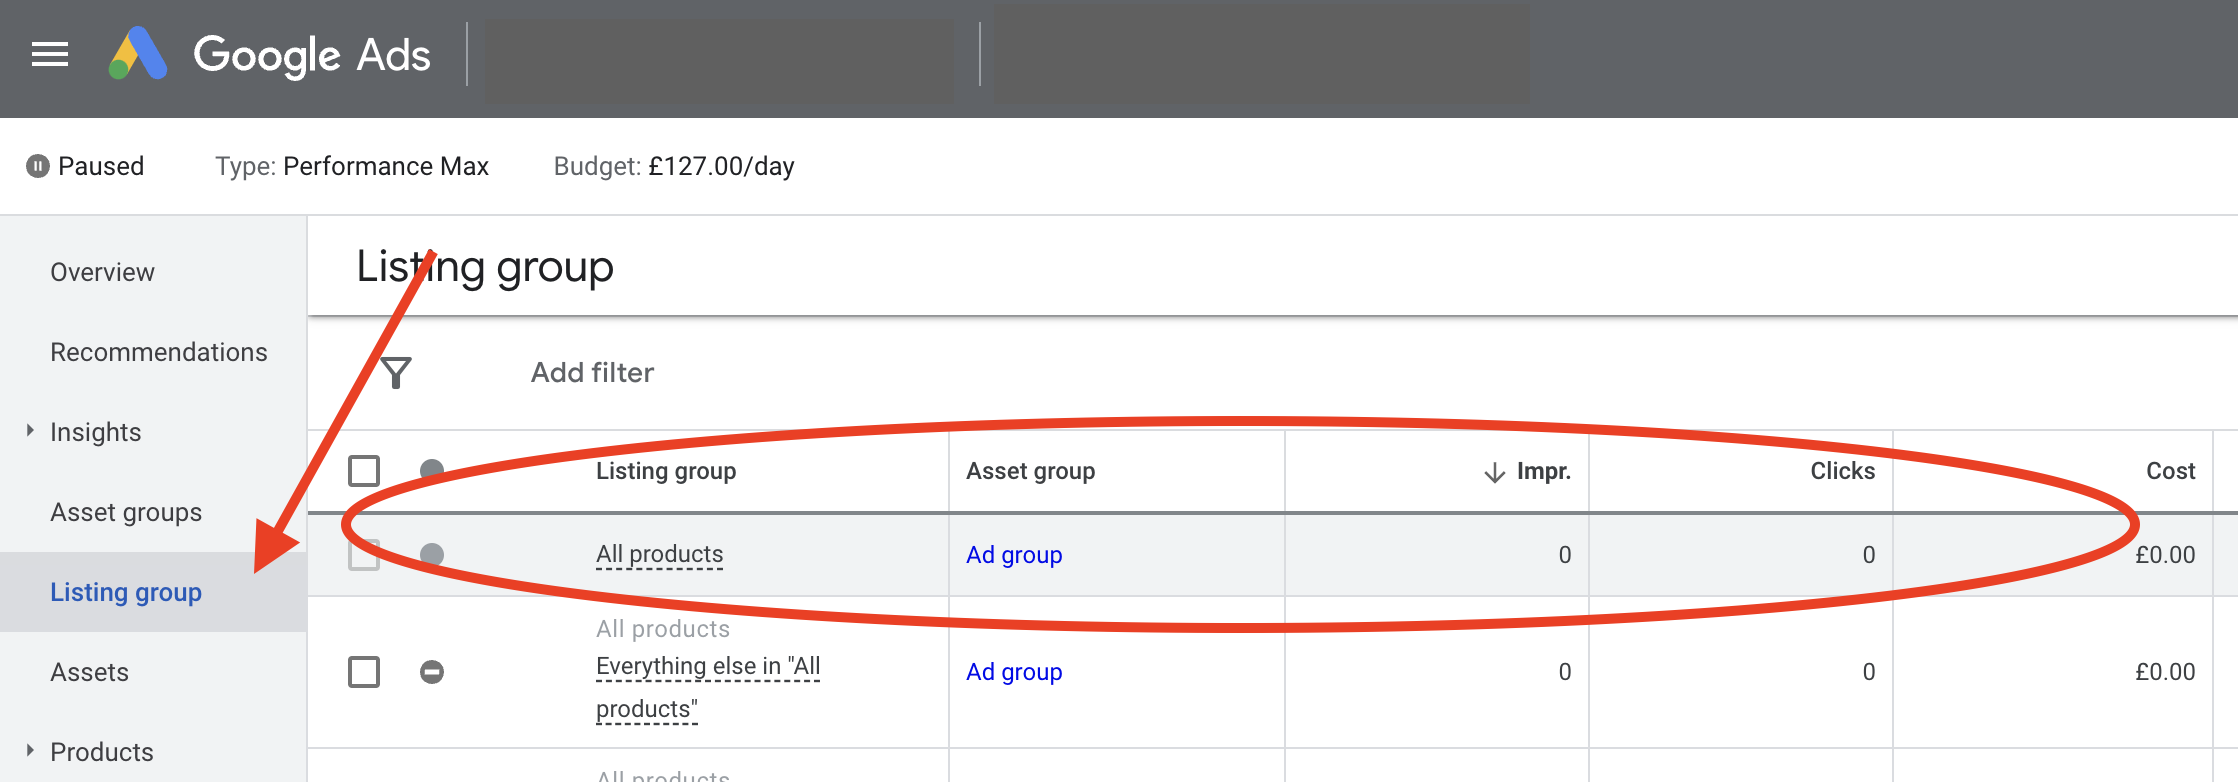 Screen shot of listing groups in Performance Max campaigns, in Google Ads interface